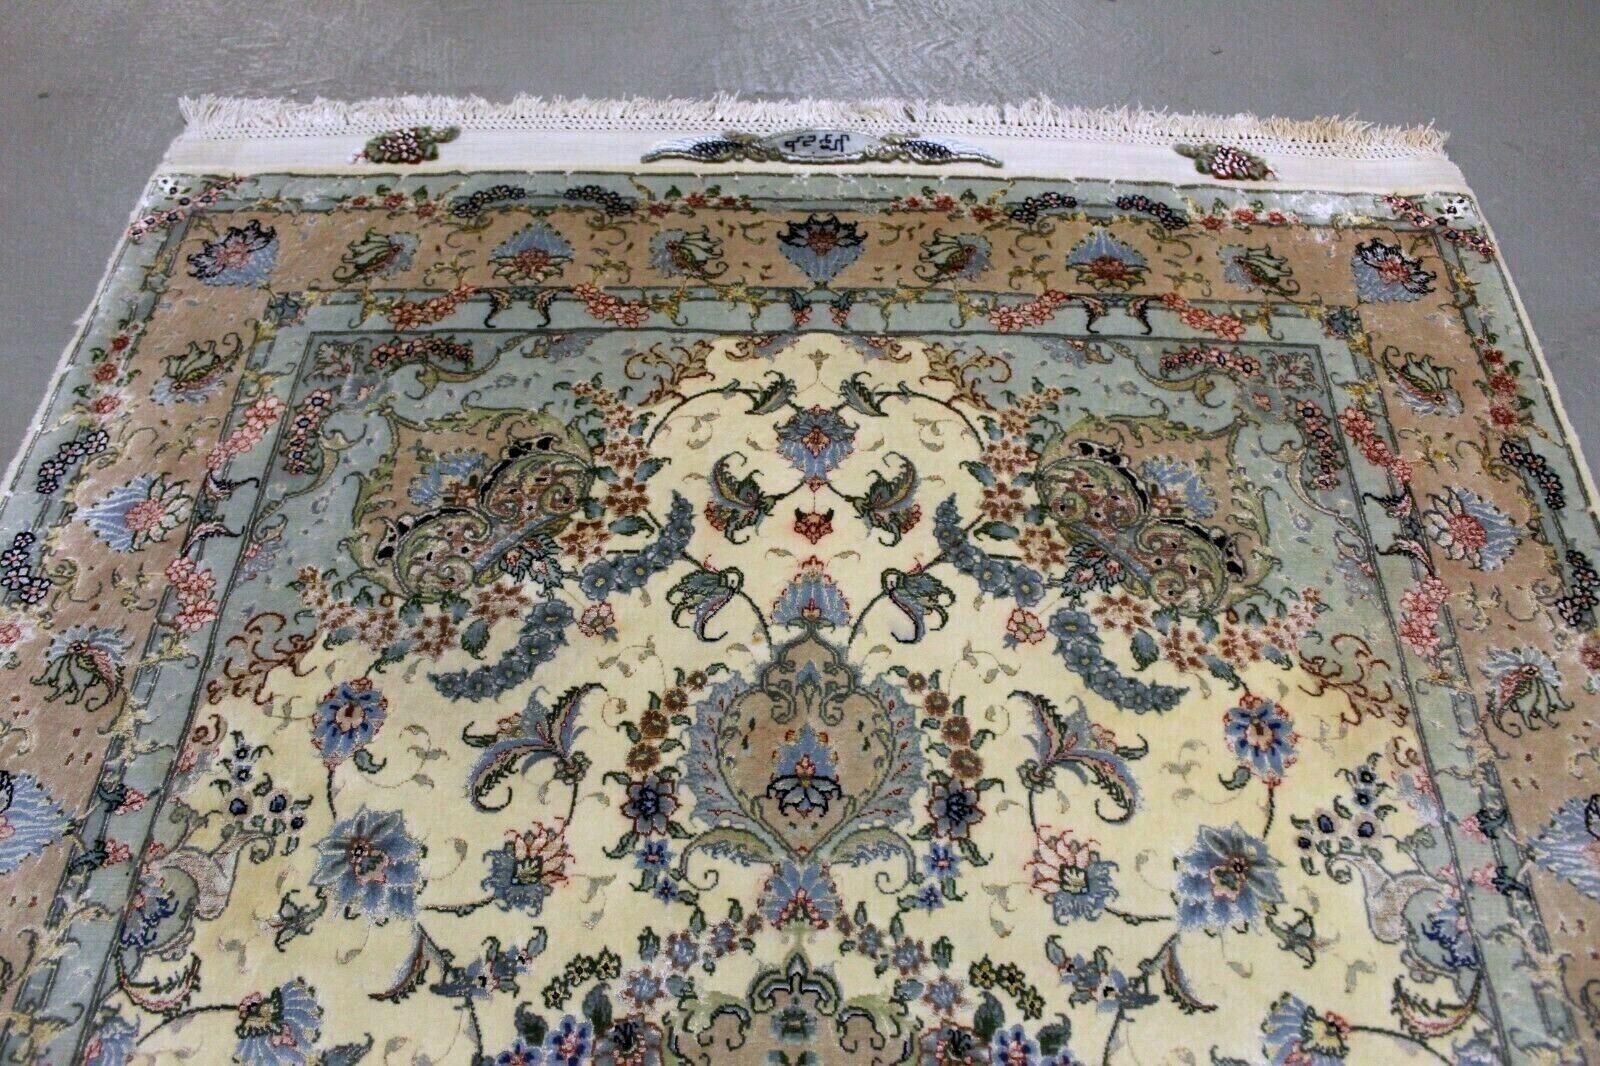 This exquisite 100cm x 165cm vintage Persian Tabriz rug, crafted in the 1970s, is a true masterpiece of timeless elegance. Its intricate design and luxurious materials make it a remarkable addition to any space. Let’s delve into the